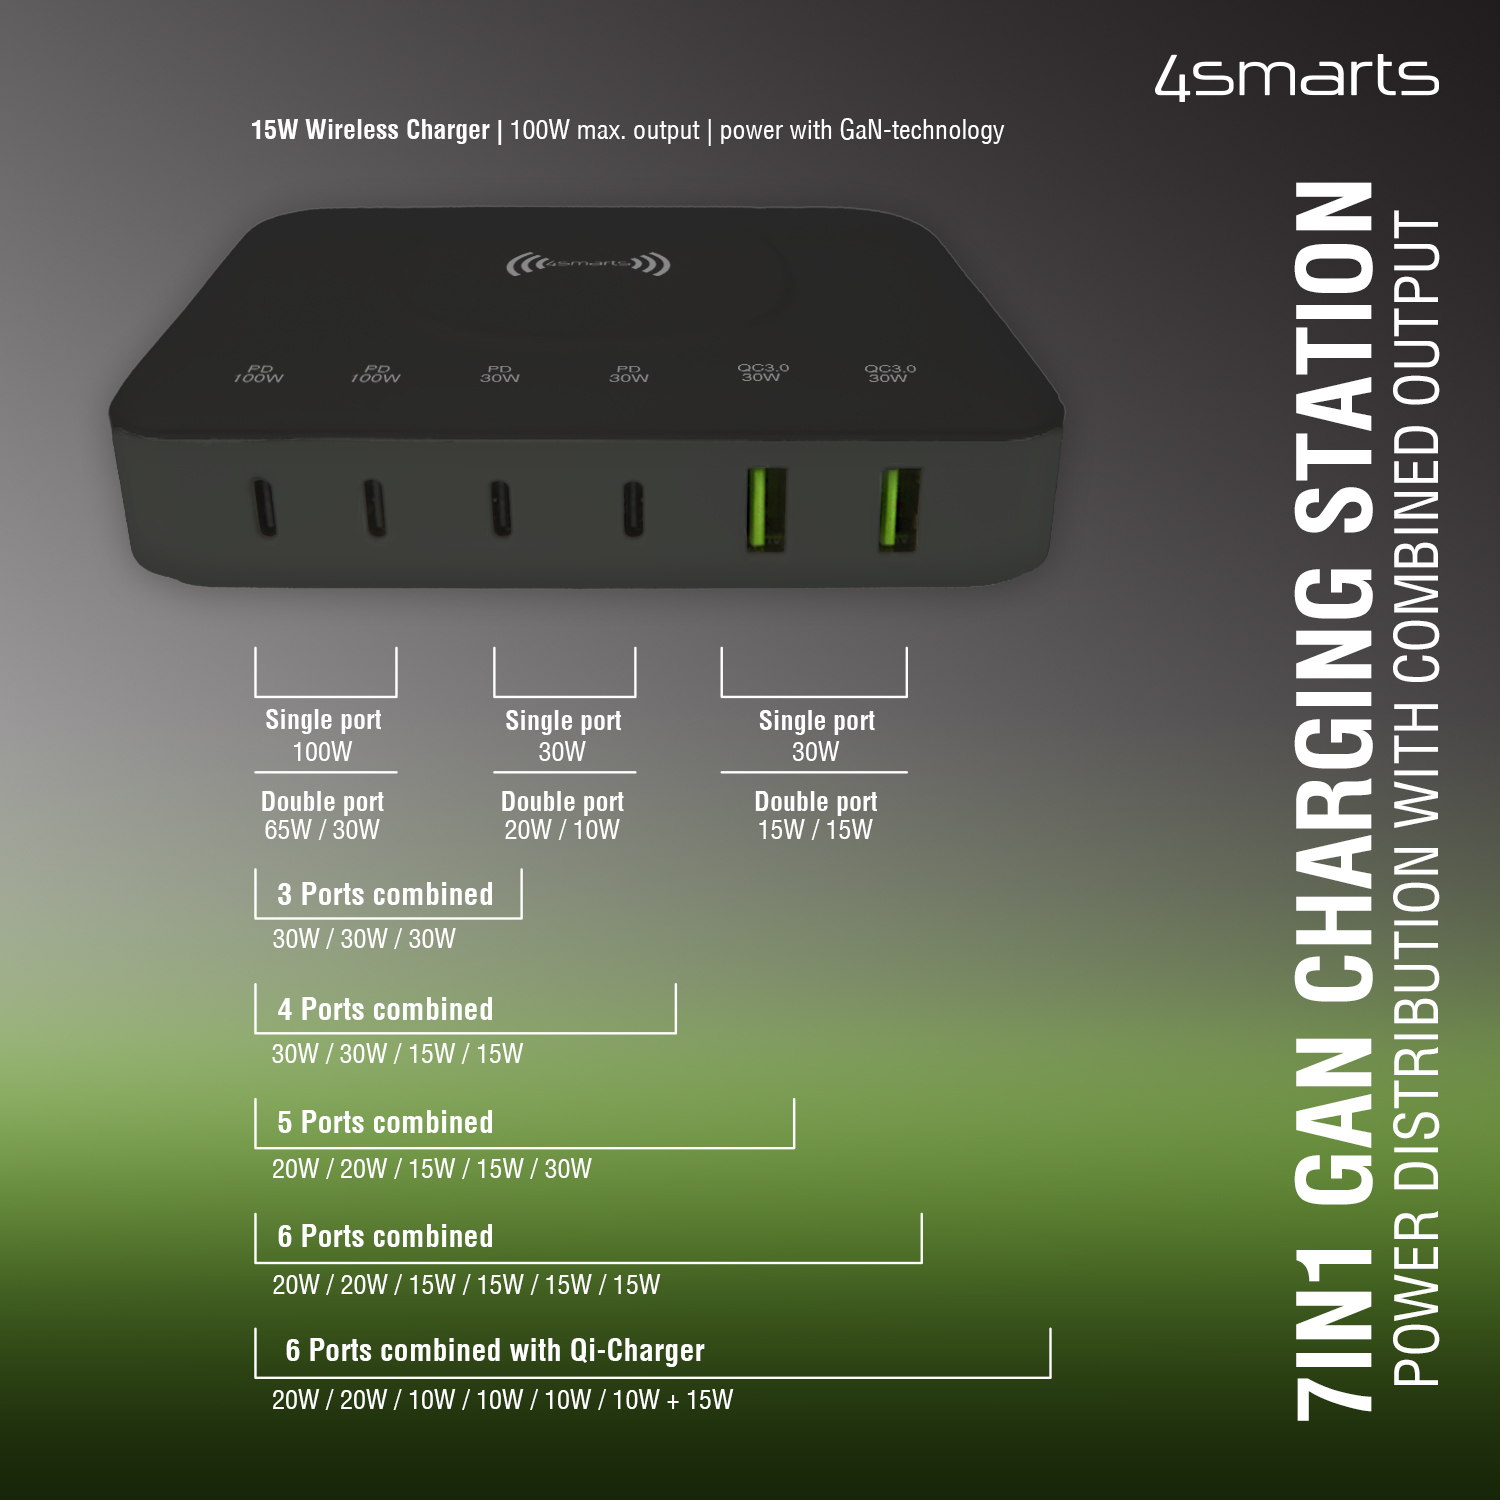 The 4smarts 7in1 GaN charging station offers power distribution with combined output.